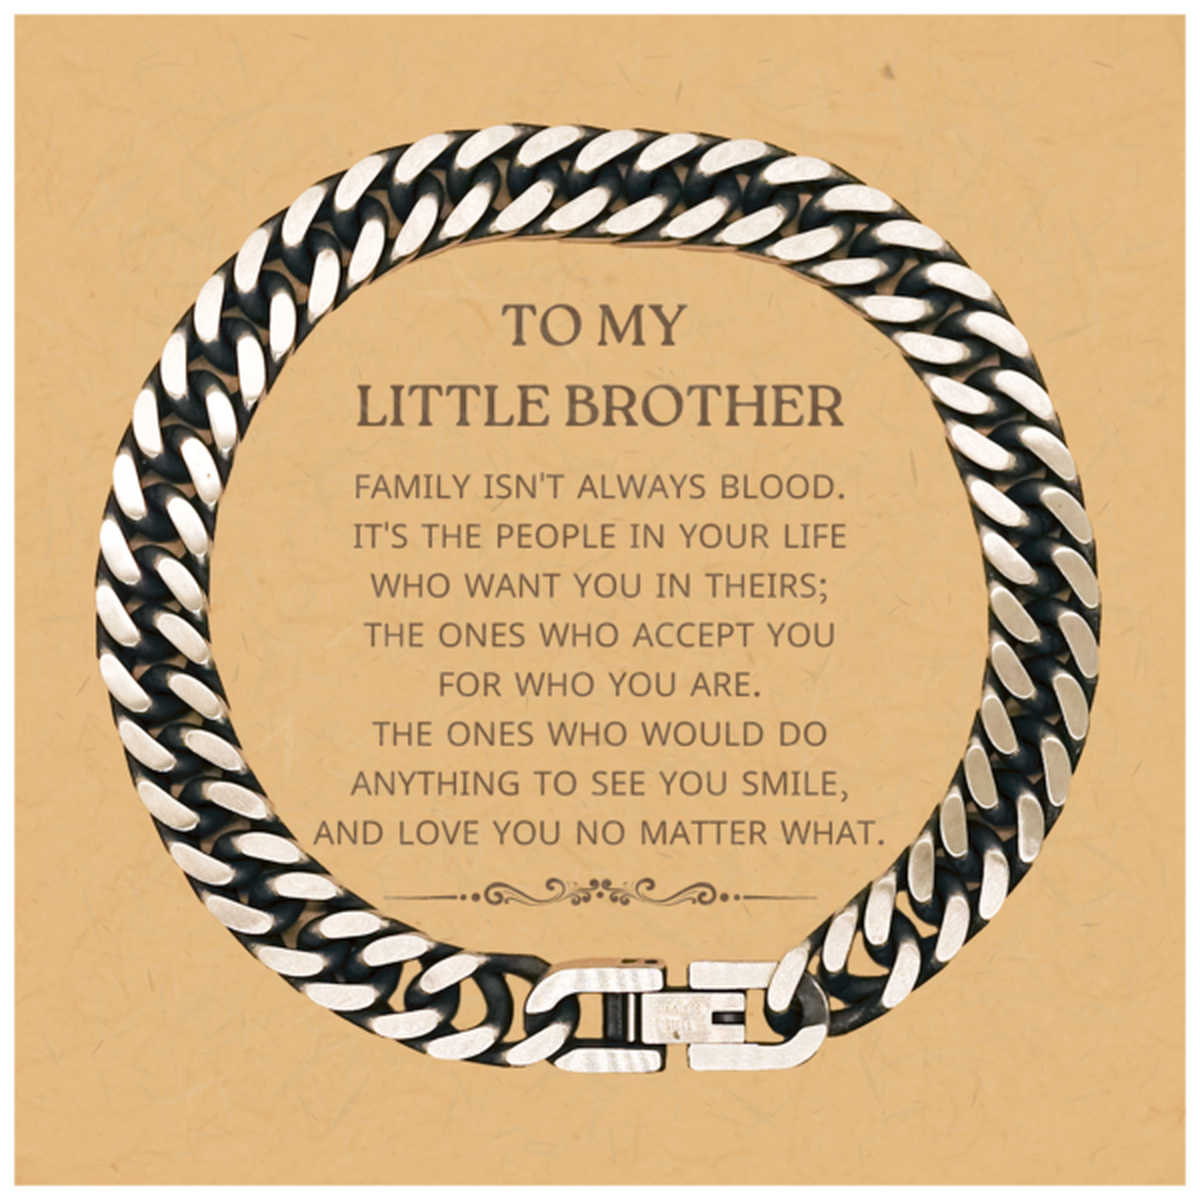 To My Little Brother Gifts, Family isn't always blood, Little Brother Cuban Link Chain Bracelet, Birthday Christmas Unique Present For Little Brother